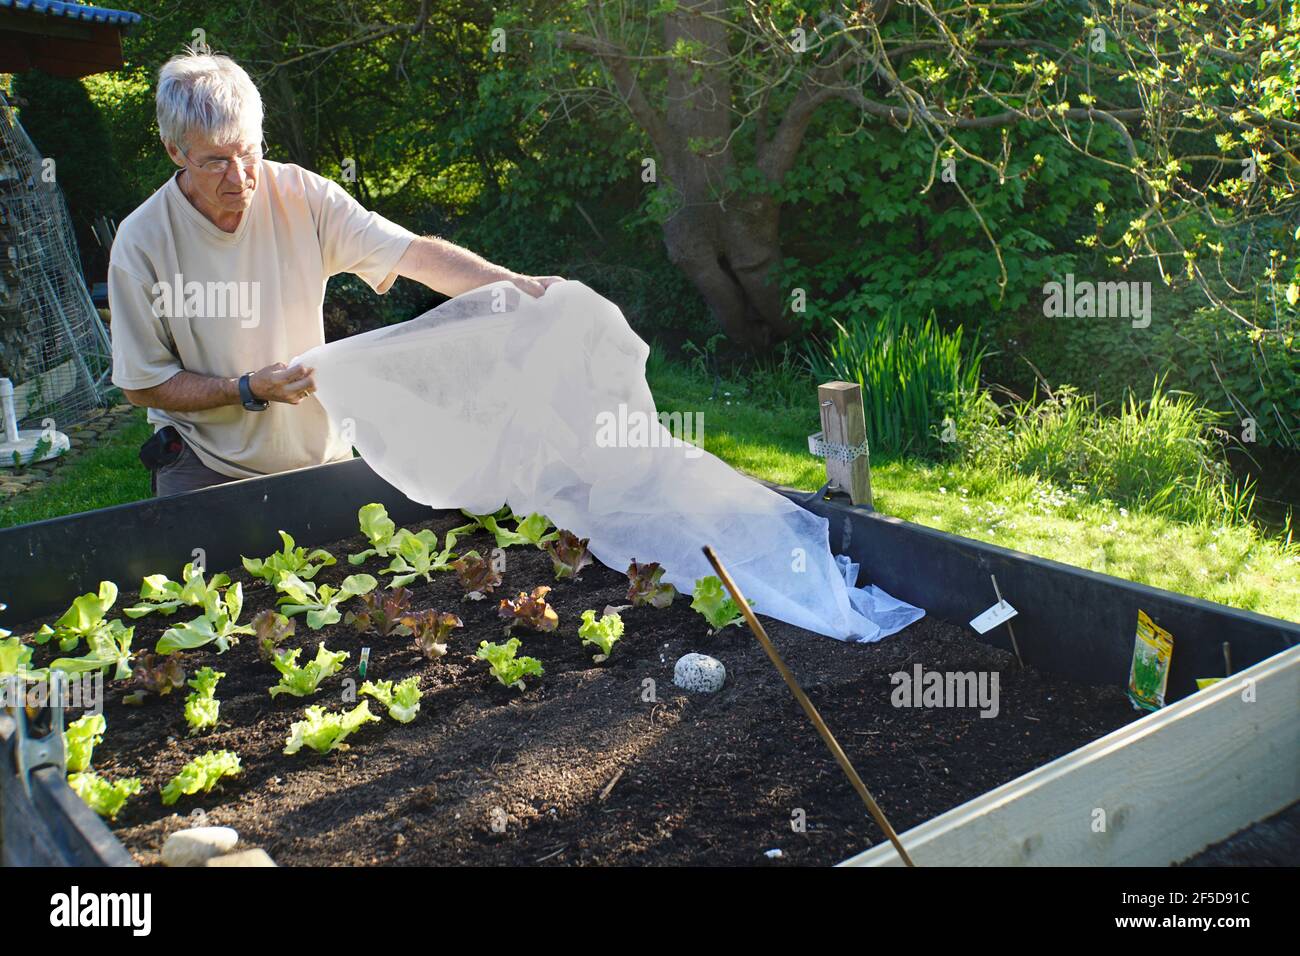 hobby gardener covering young lettuces in a raised bed with a liner, Germany Stock Photo